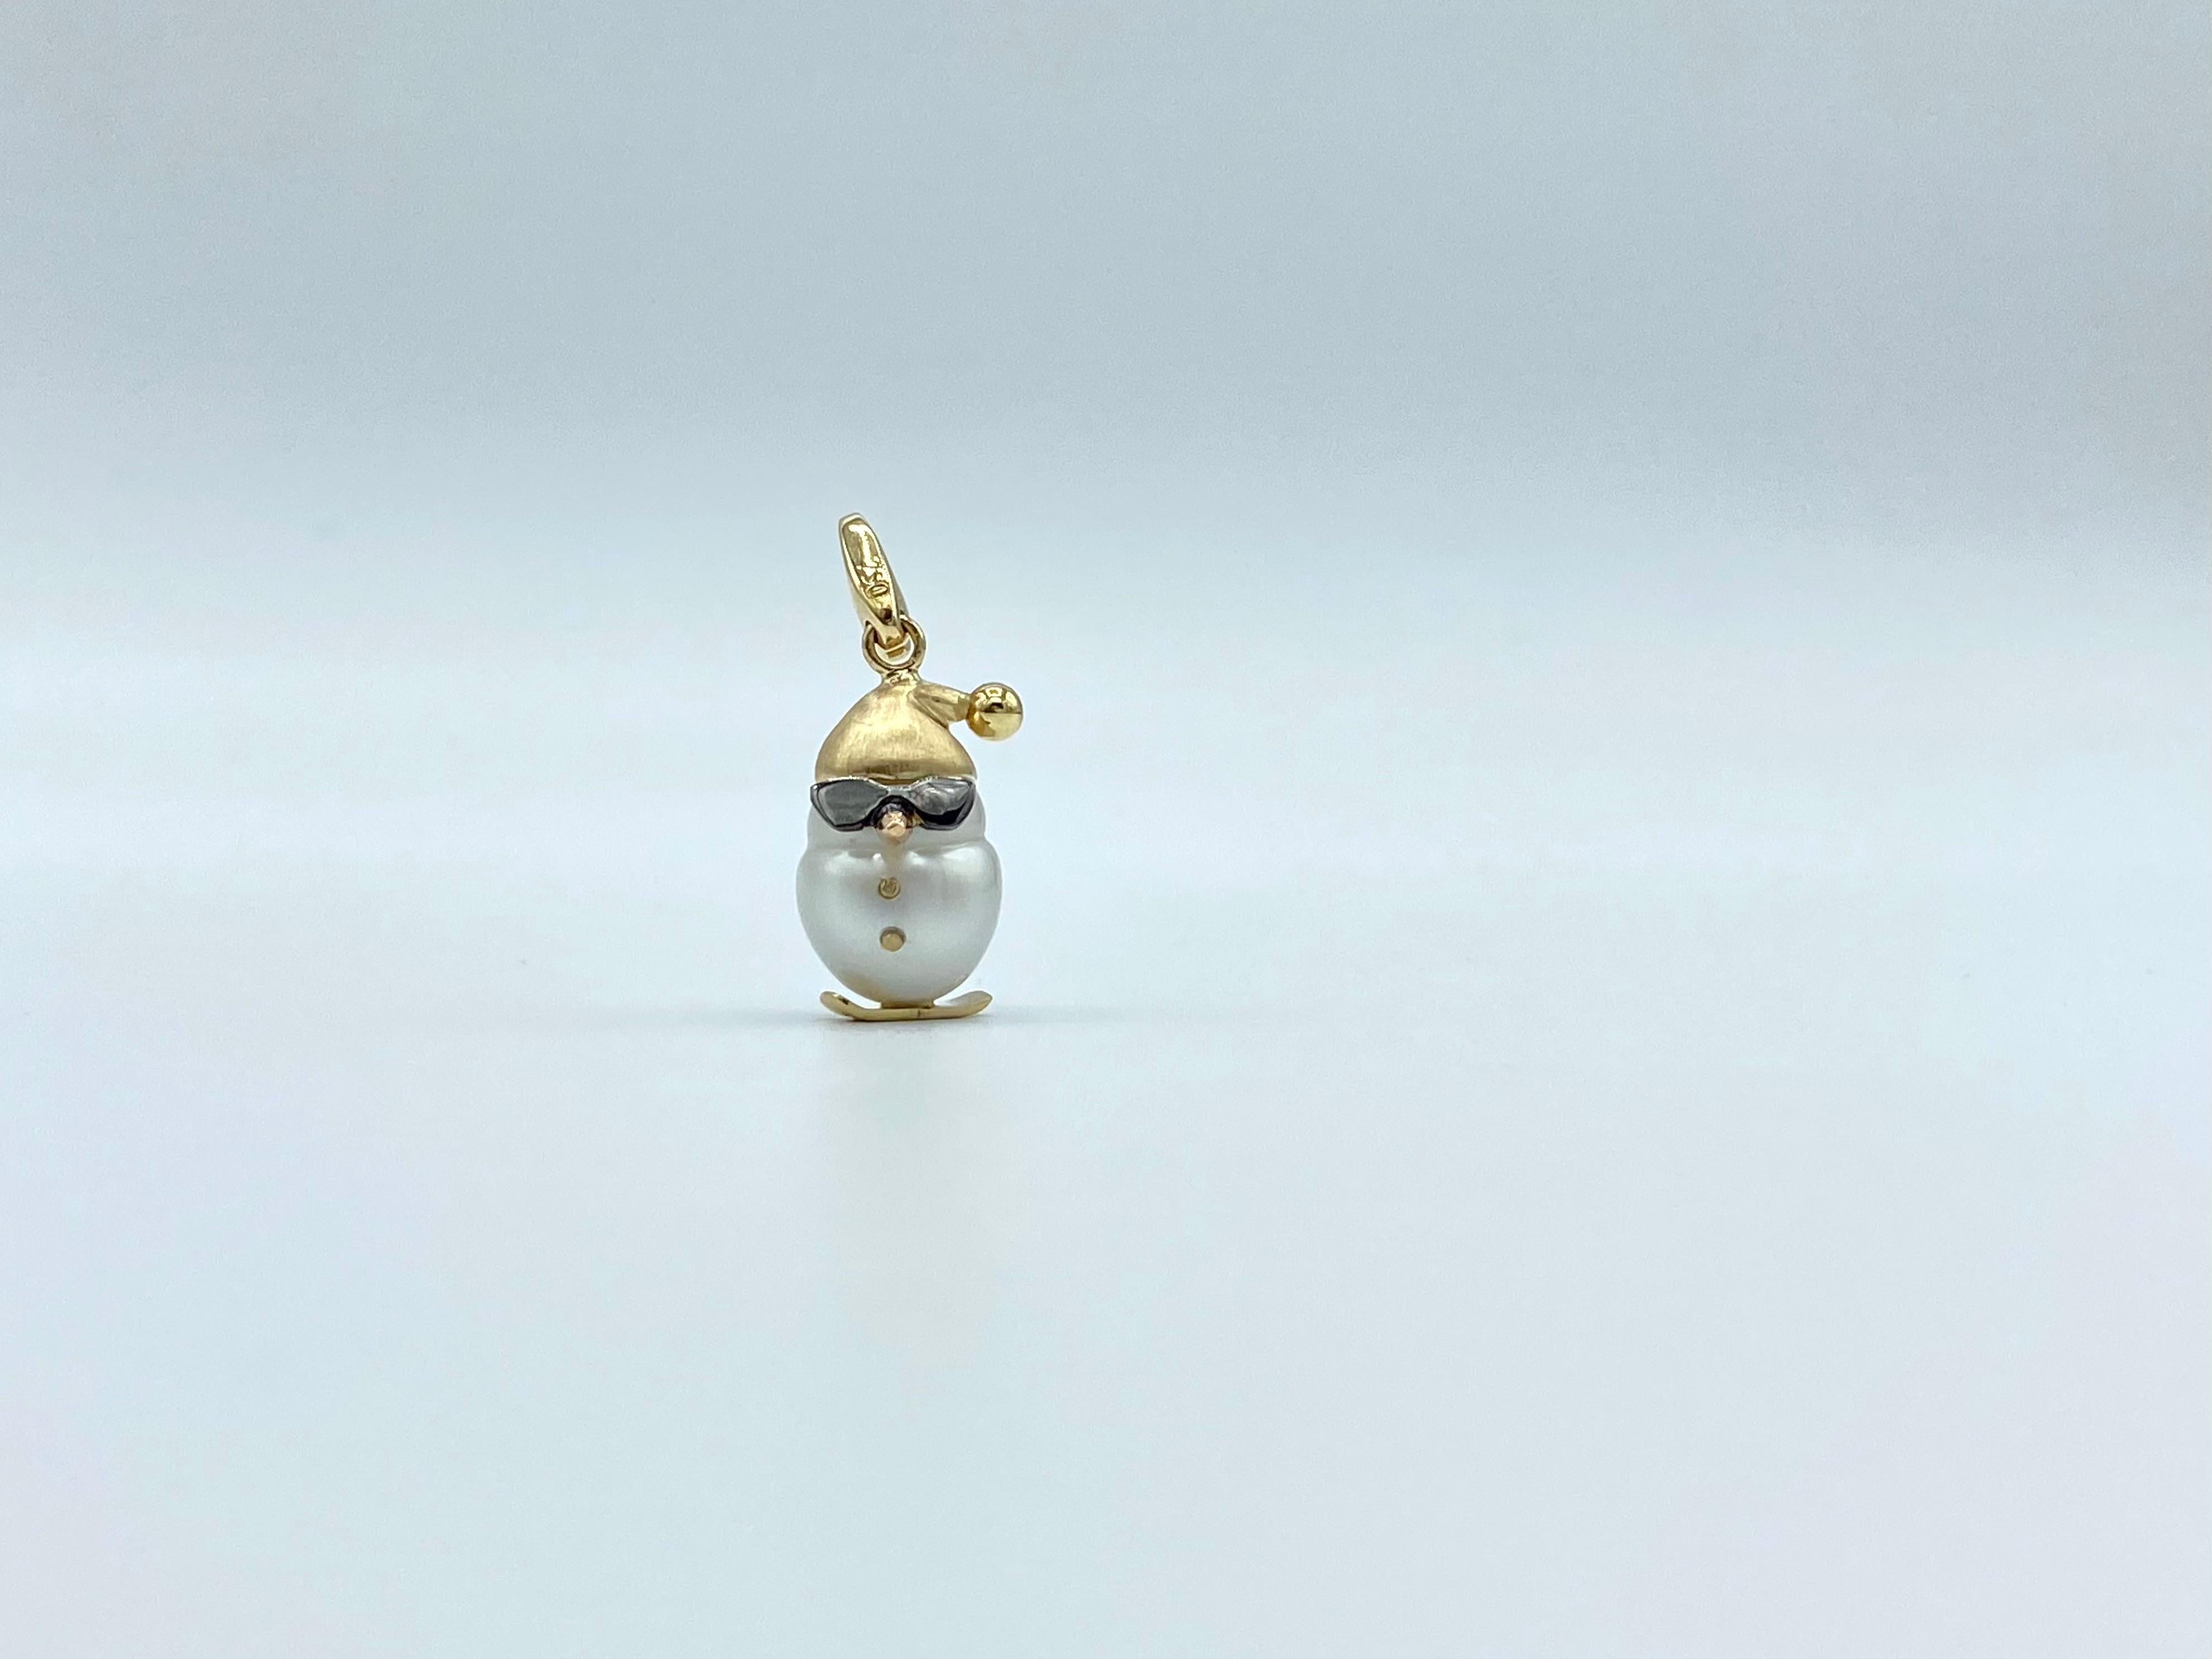 18 Karat Gold Skier Snowman Black Diamond Pearl Pin Brooch

It's time to make a snowman!

I wanted to create for the winter time a pendant with an Australian pearl.
Its special shape inspired me to create a snowman with snowboard. He wears a gold